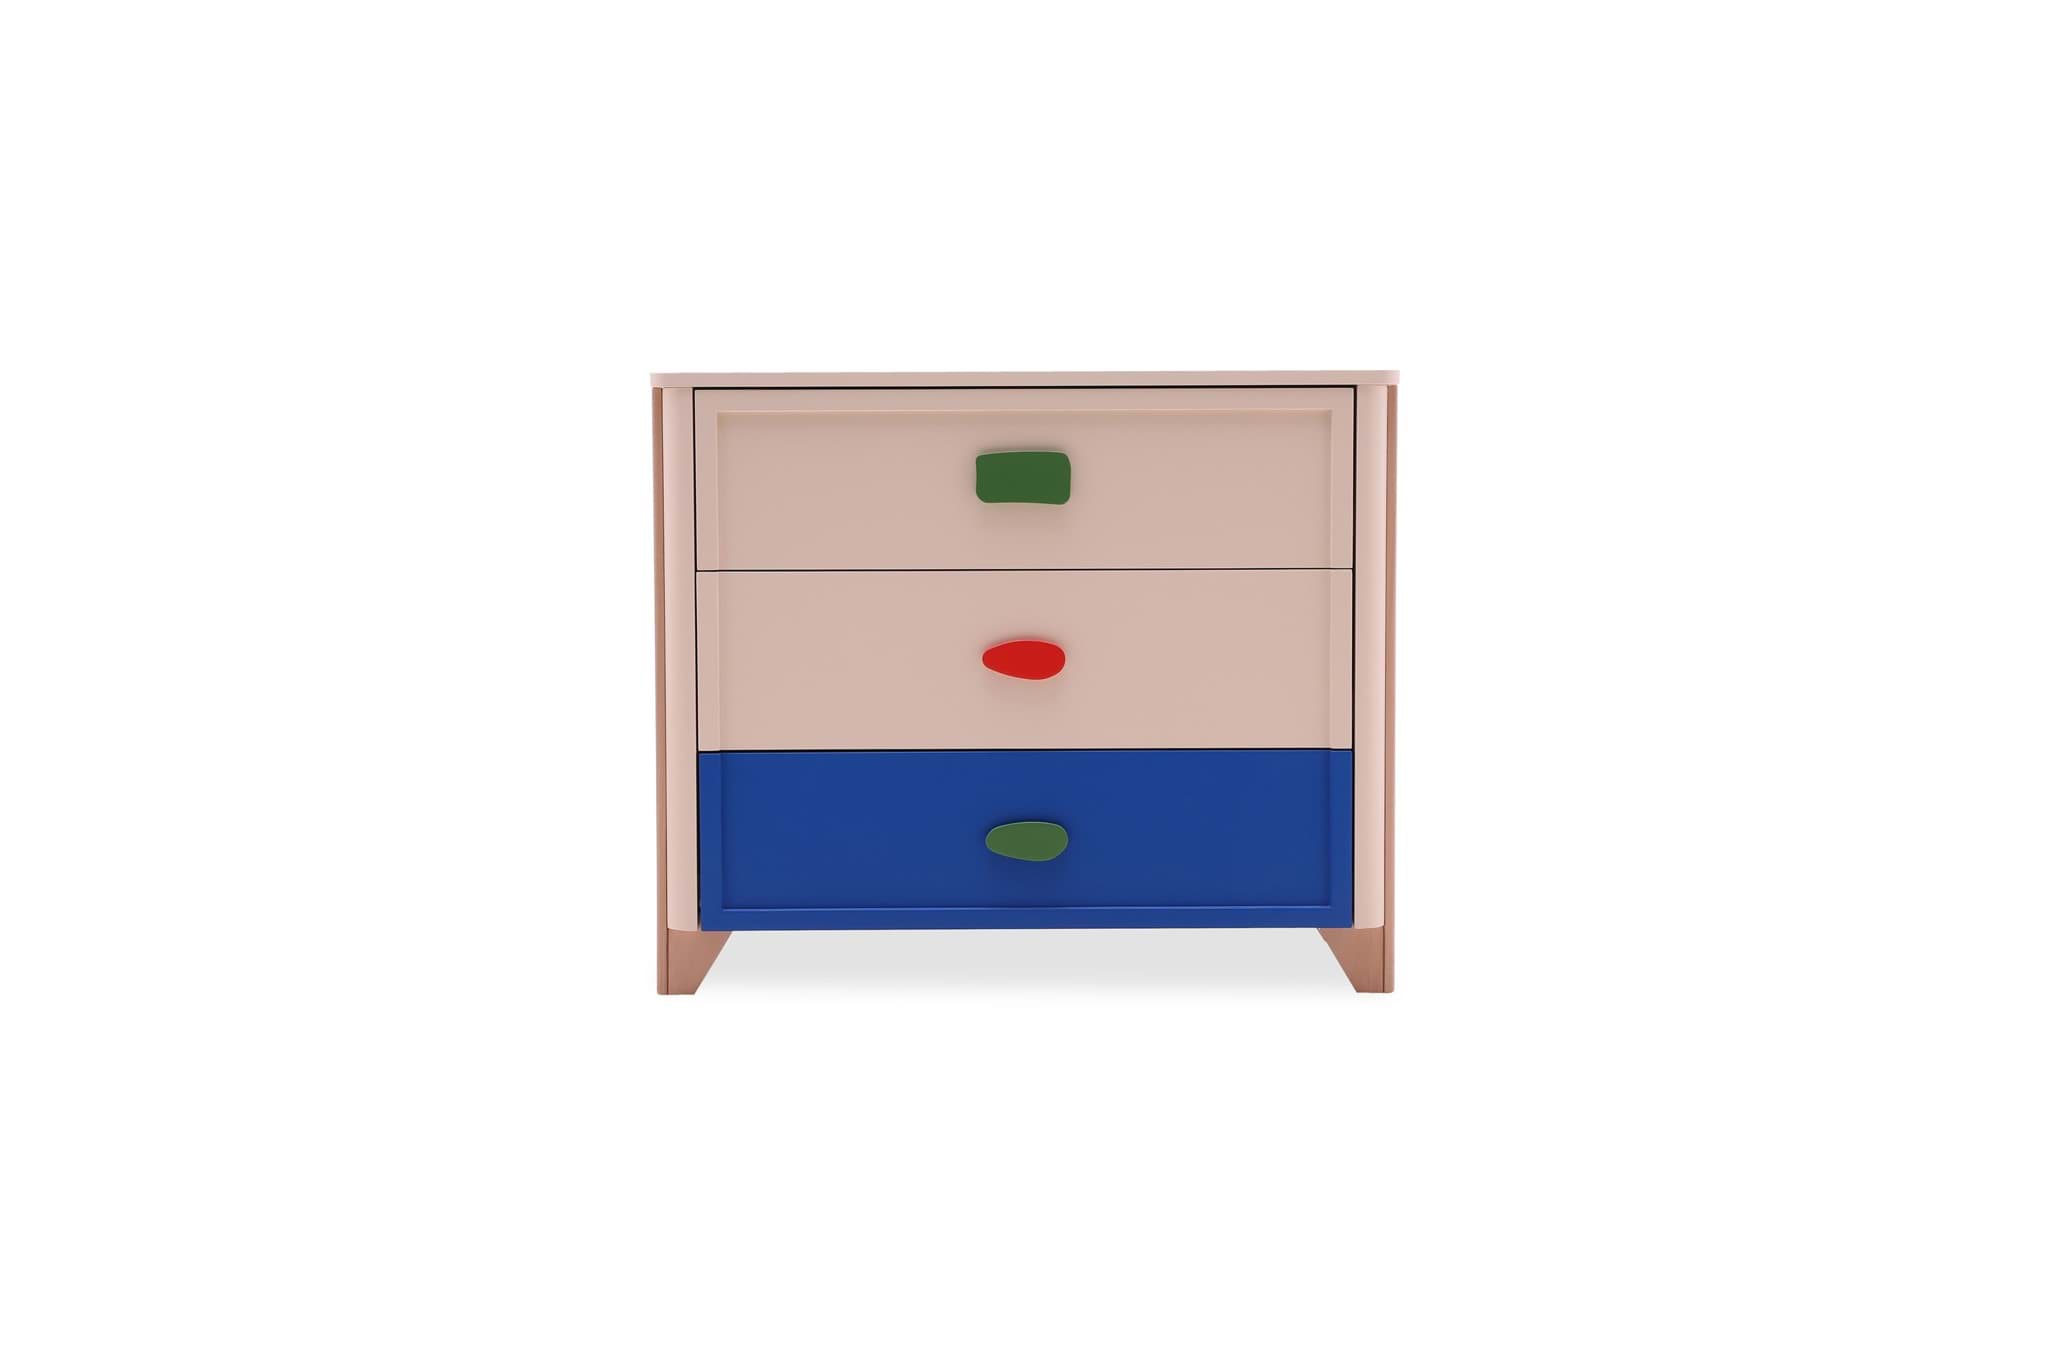 Picture of  TUTA BABY COLLECTION DRESSER